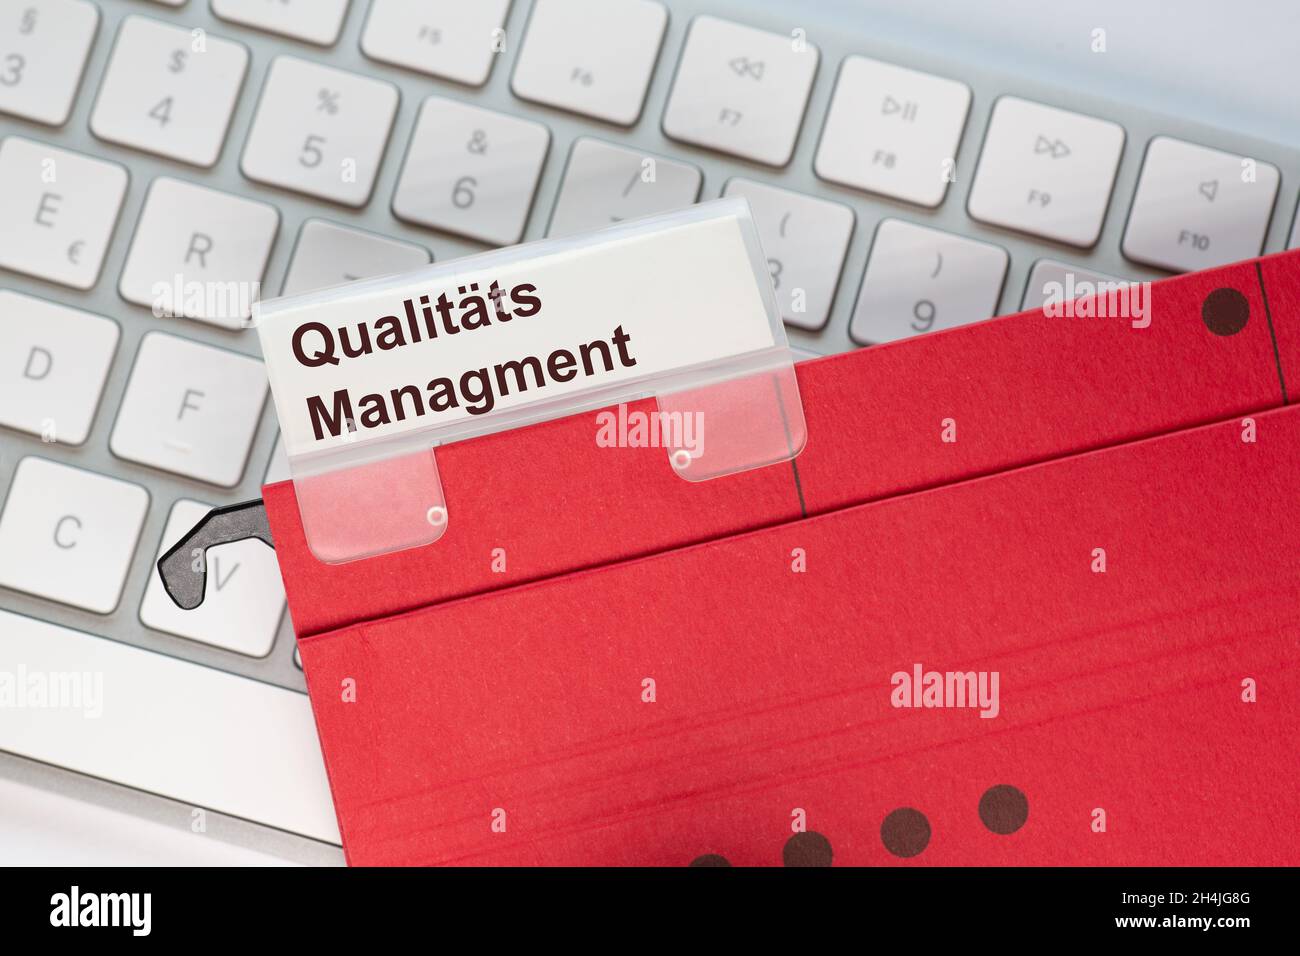 The German word for quality management can be seen on the label of a red hanging folder. The hanging folder is on a computer keyboard. Stock Photo